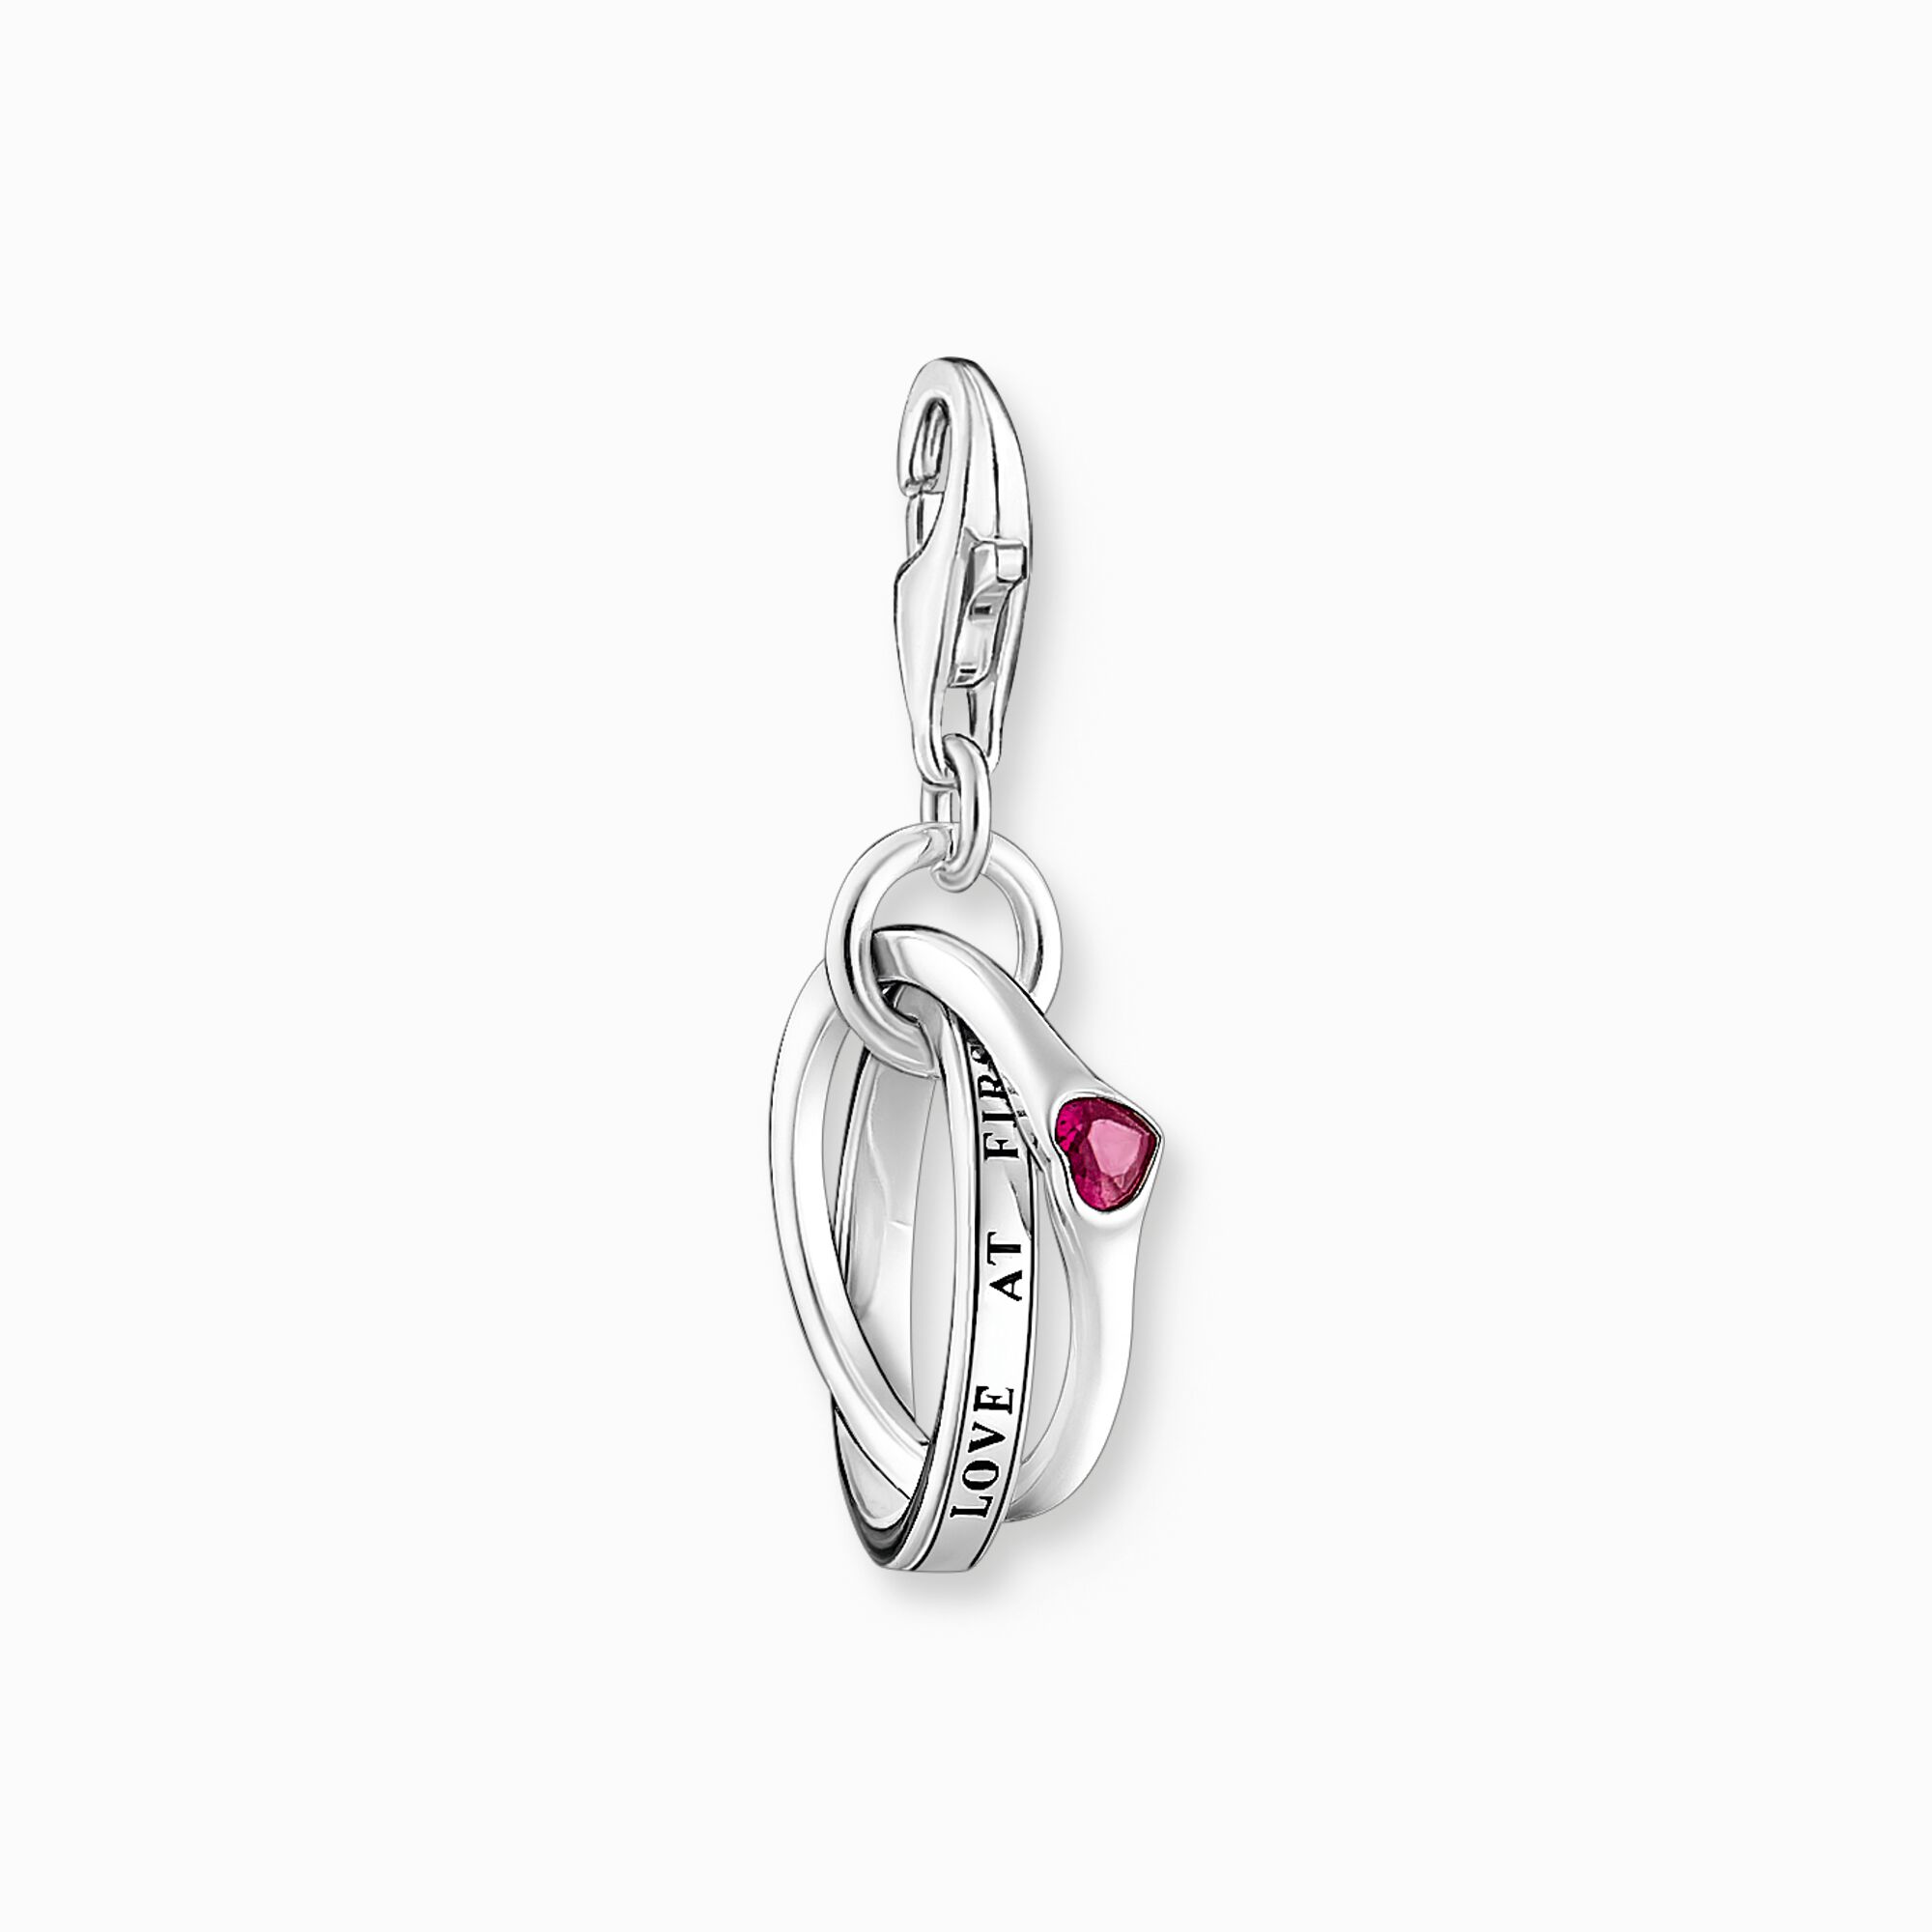 Silver charm pendant with two linked rings and a red stone from the Charm Club collection in the THOMAS SABO online store